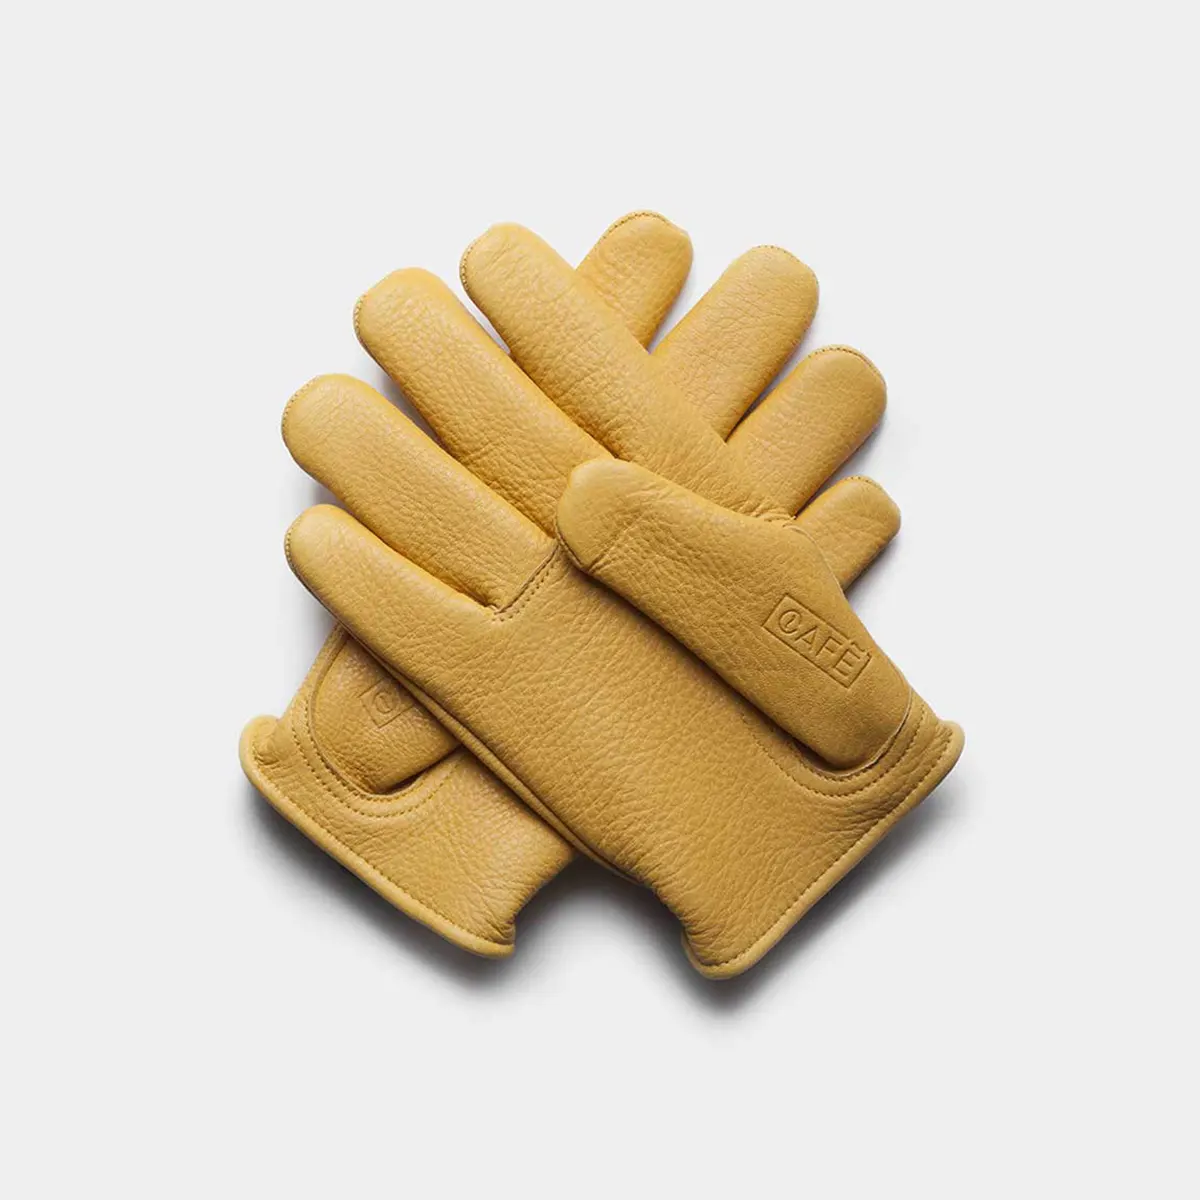 DEER SKIN LEATHER GLOVES BIKE WOMENS SECONDS NO2 GRADE LADIES YELLOW NATURAL 